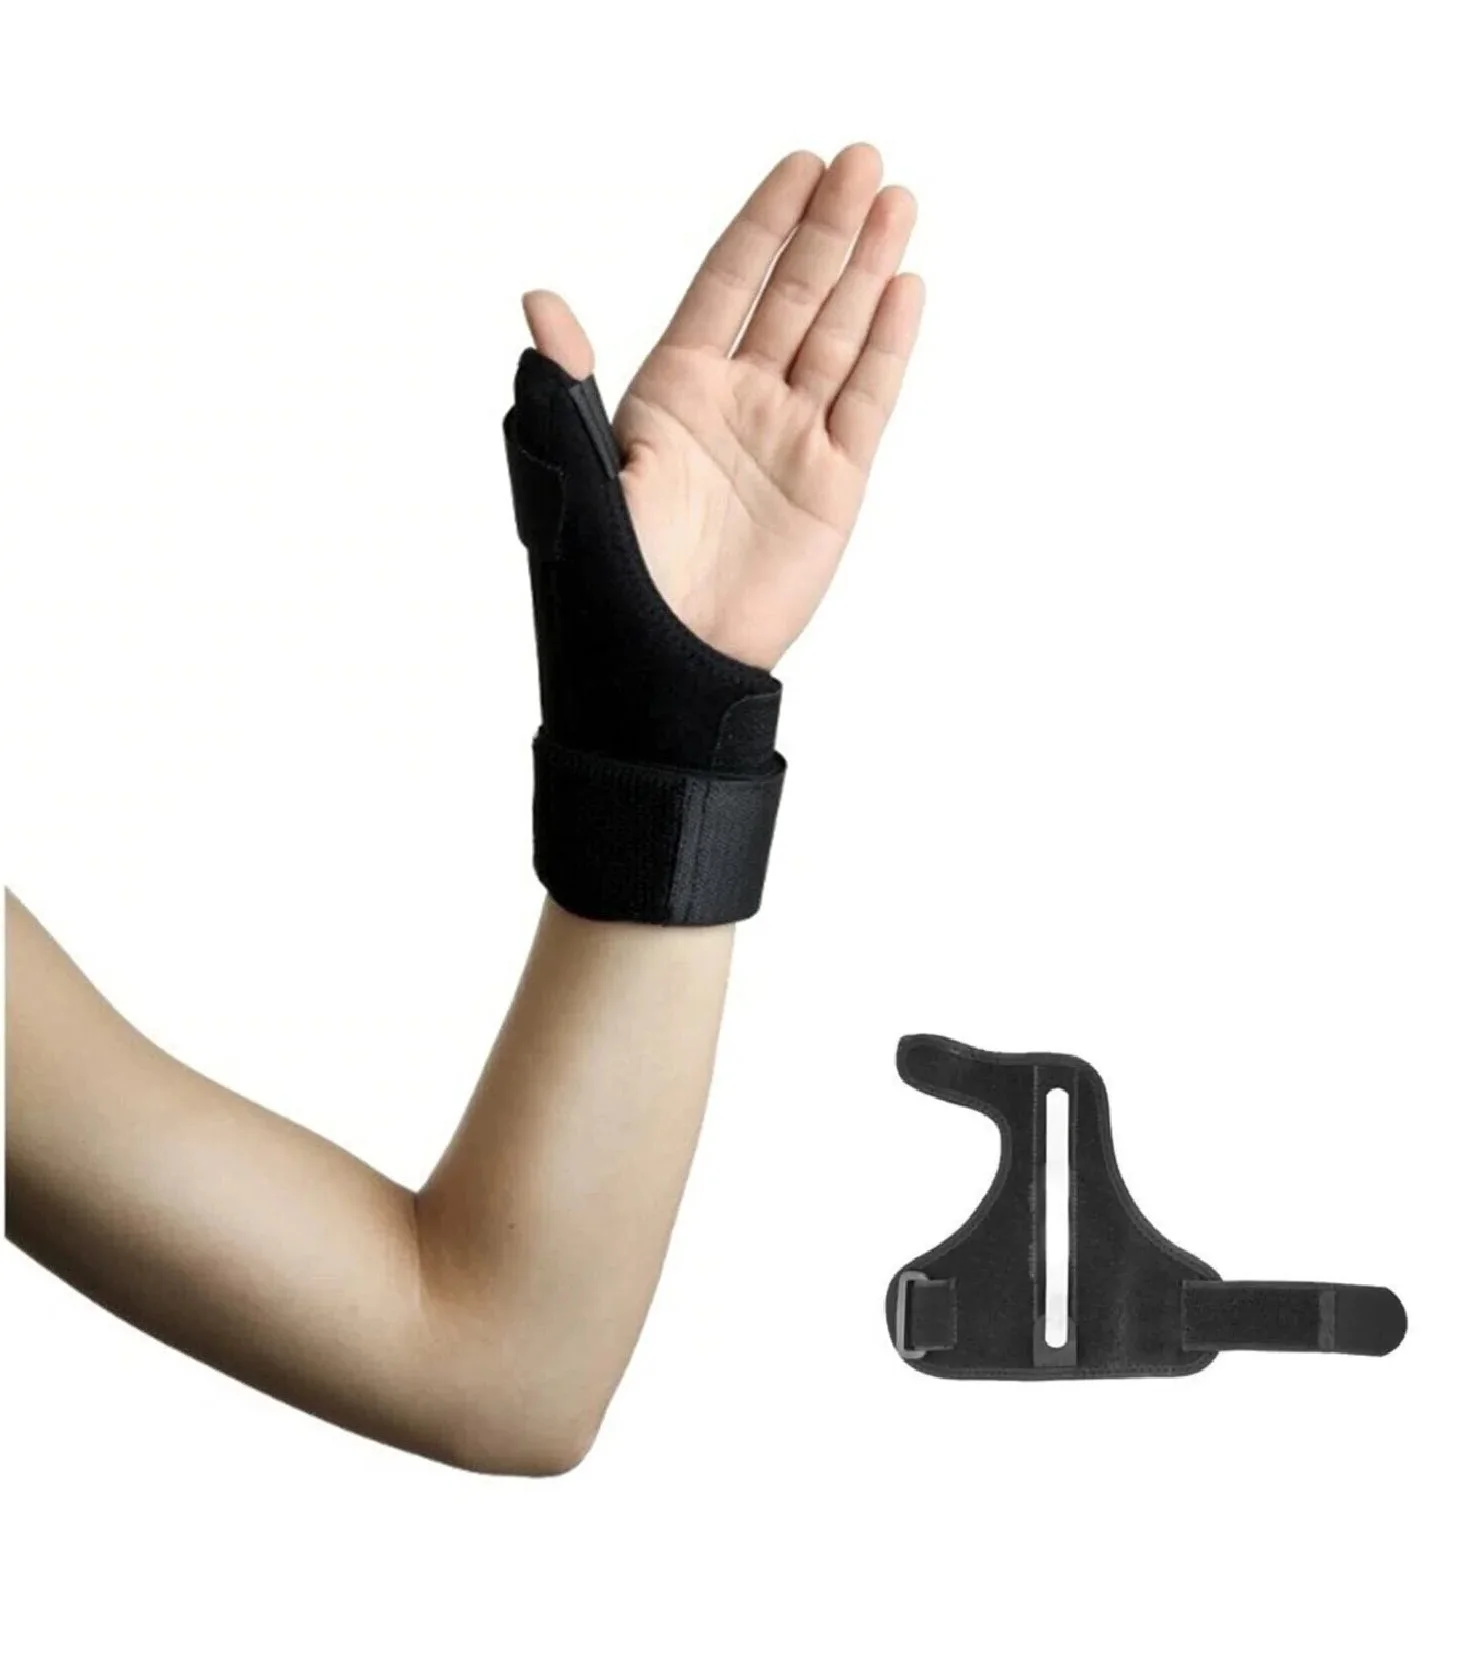 thumb-brace-orthosis-for-tenosynovitis-and-mouse-hand-light-and-breathable-thumb-splint-for-left-and-right-hand-1pcs